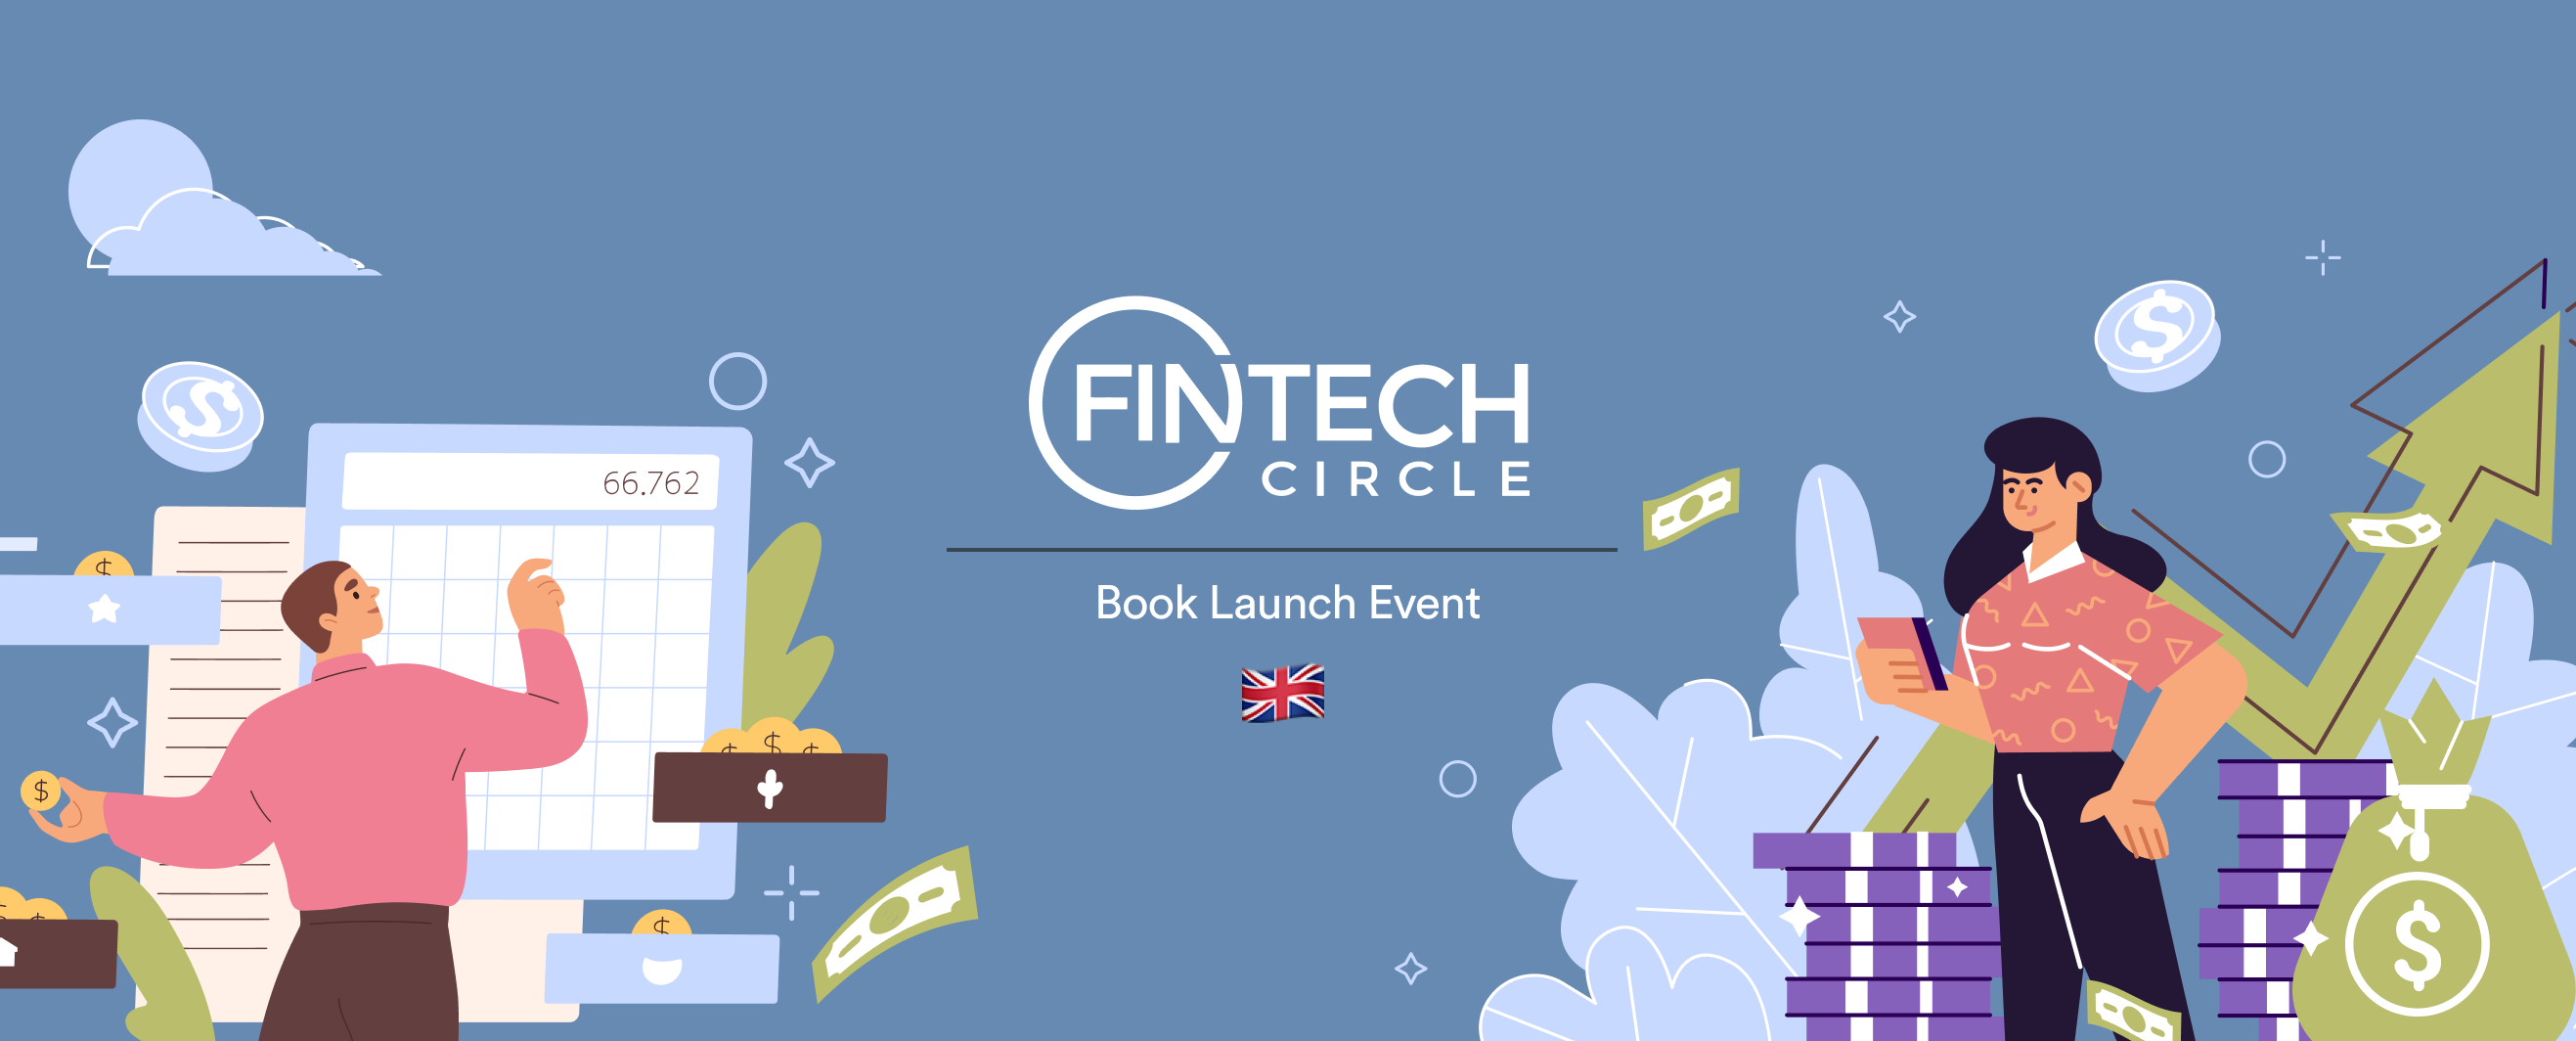 ‘Fintech Circle’ pulls off a successful book launch event for with over 700 attendees on Airmeet